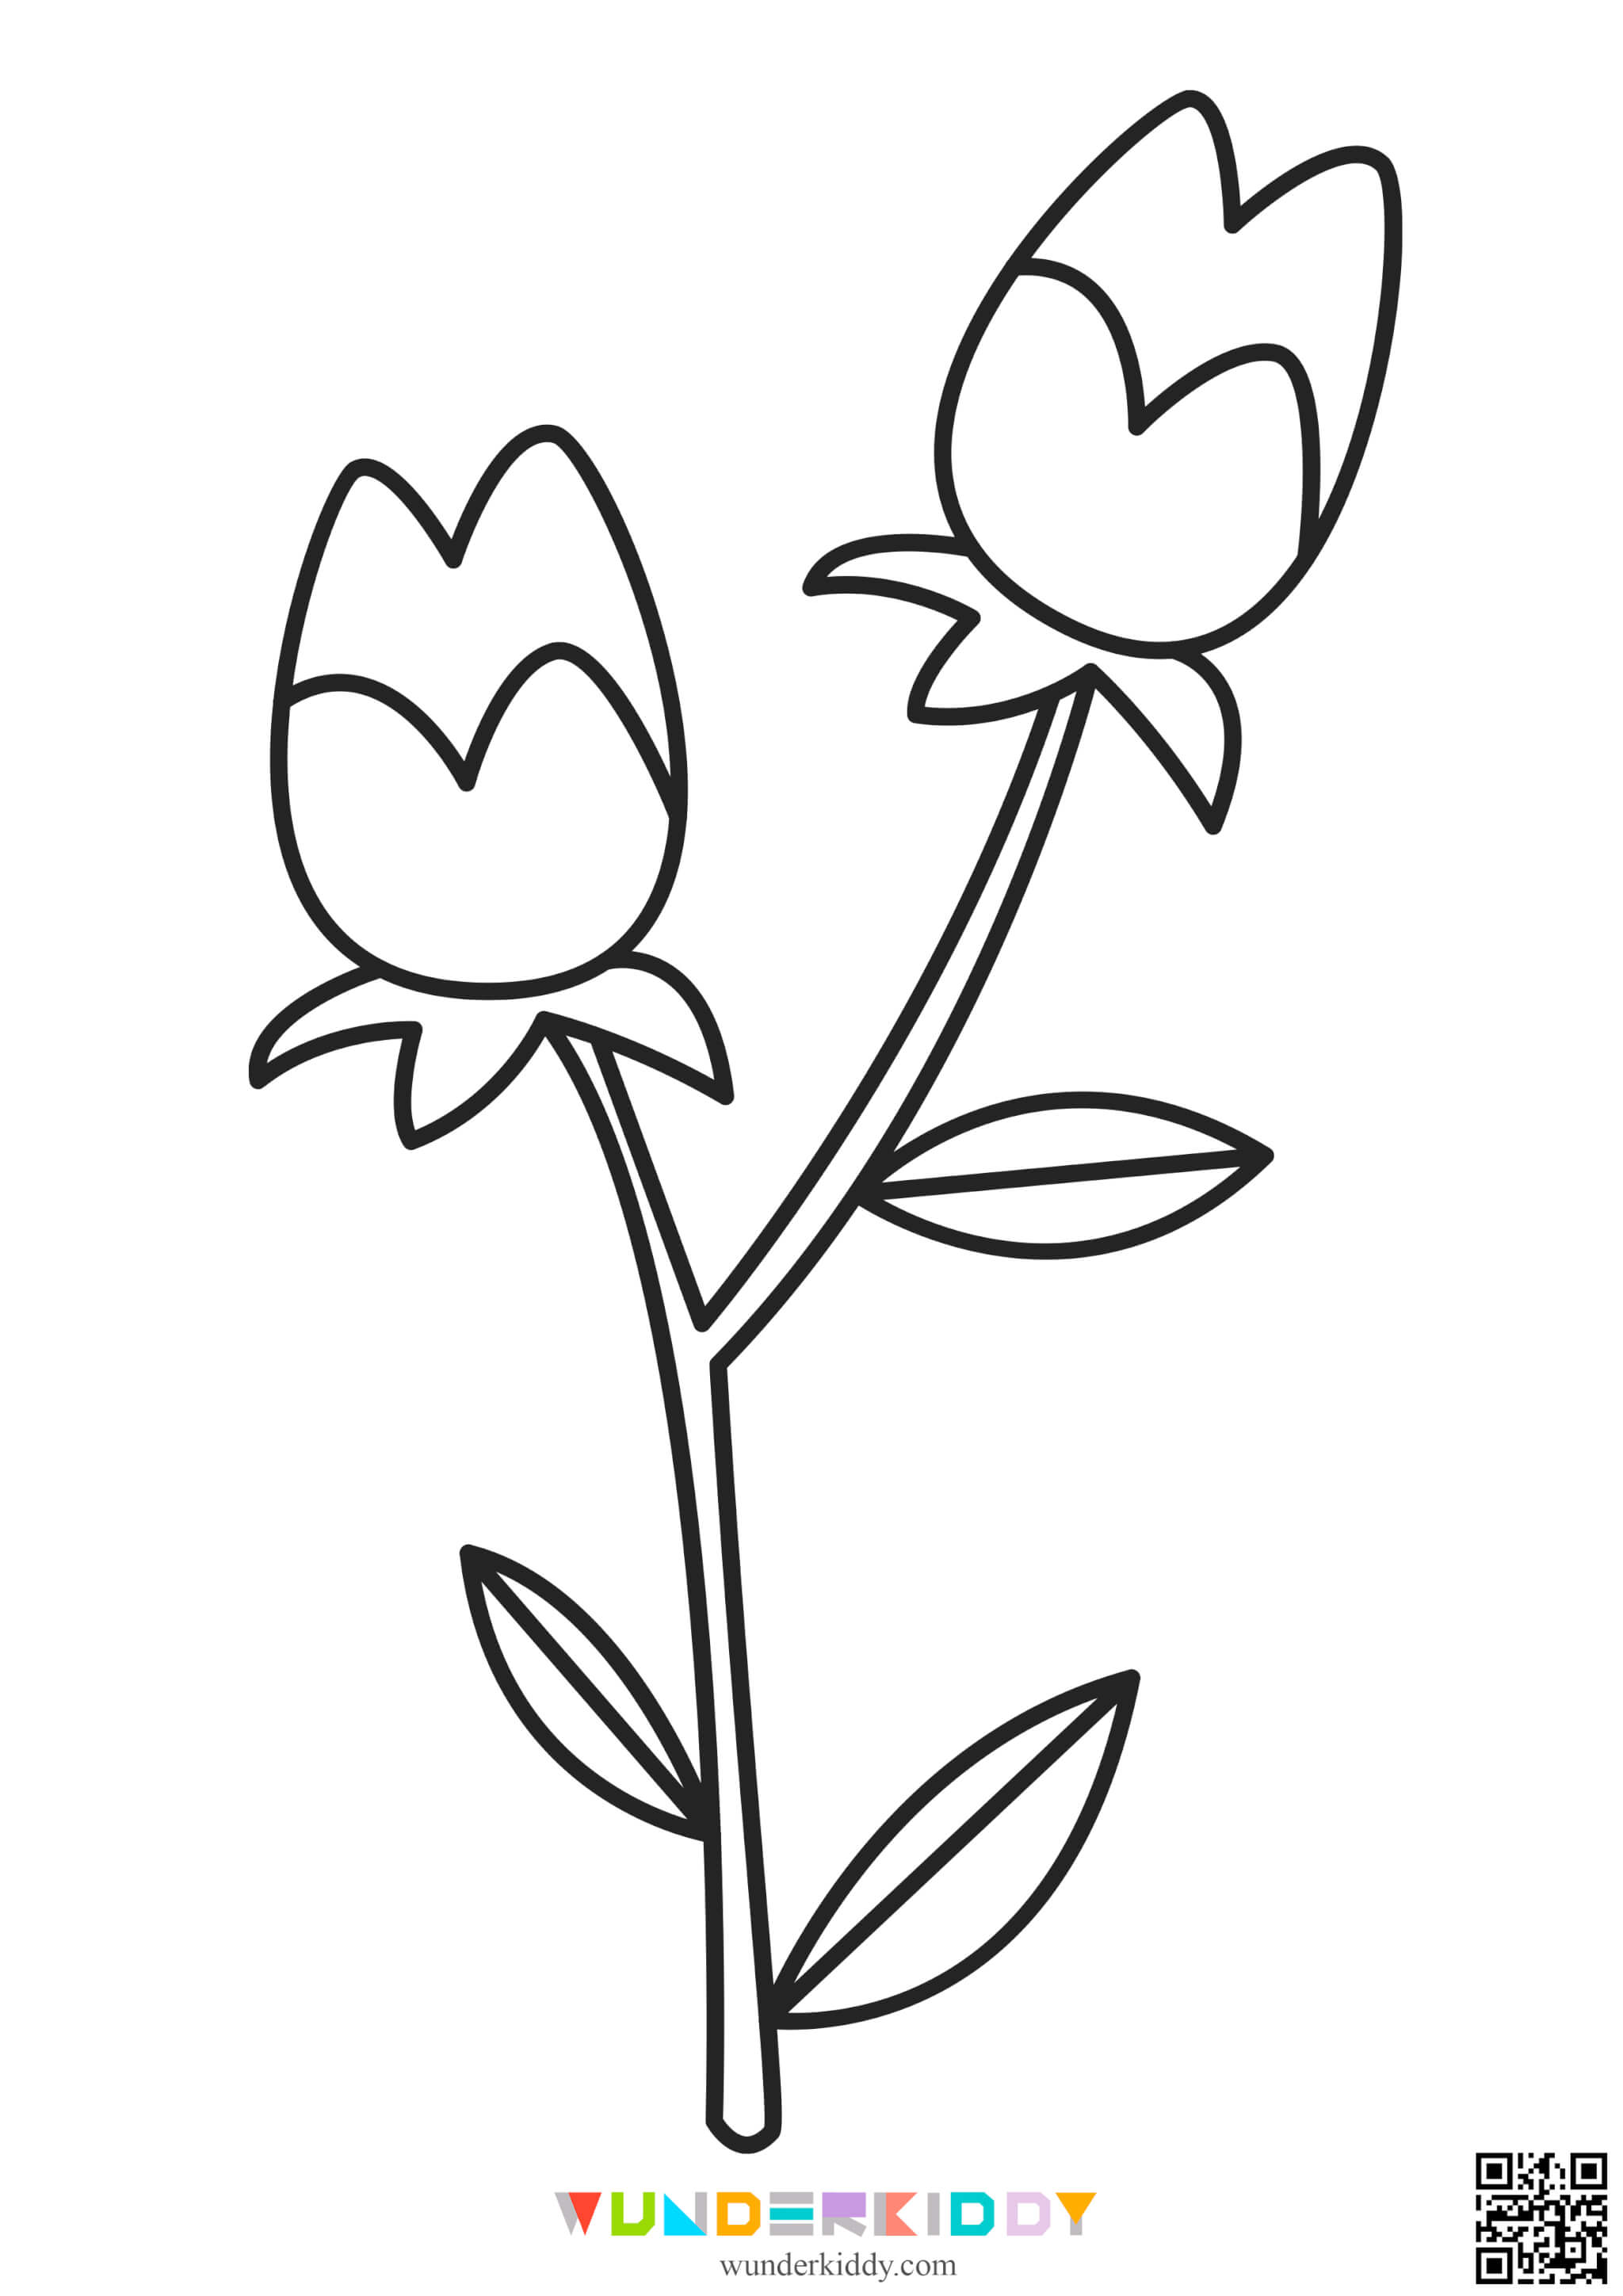 Flower Printable Coloring Pages - Image 14